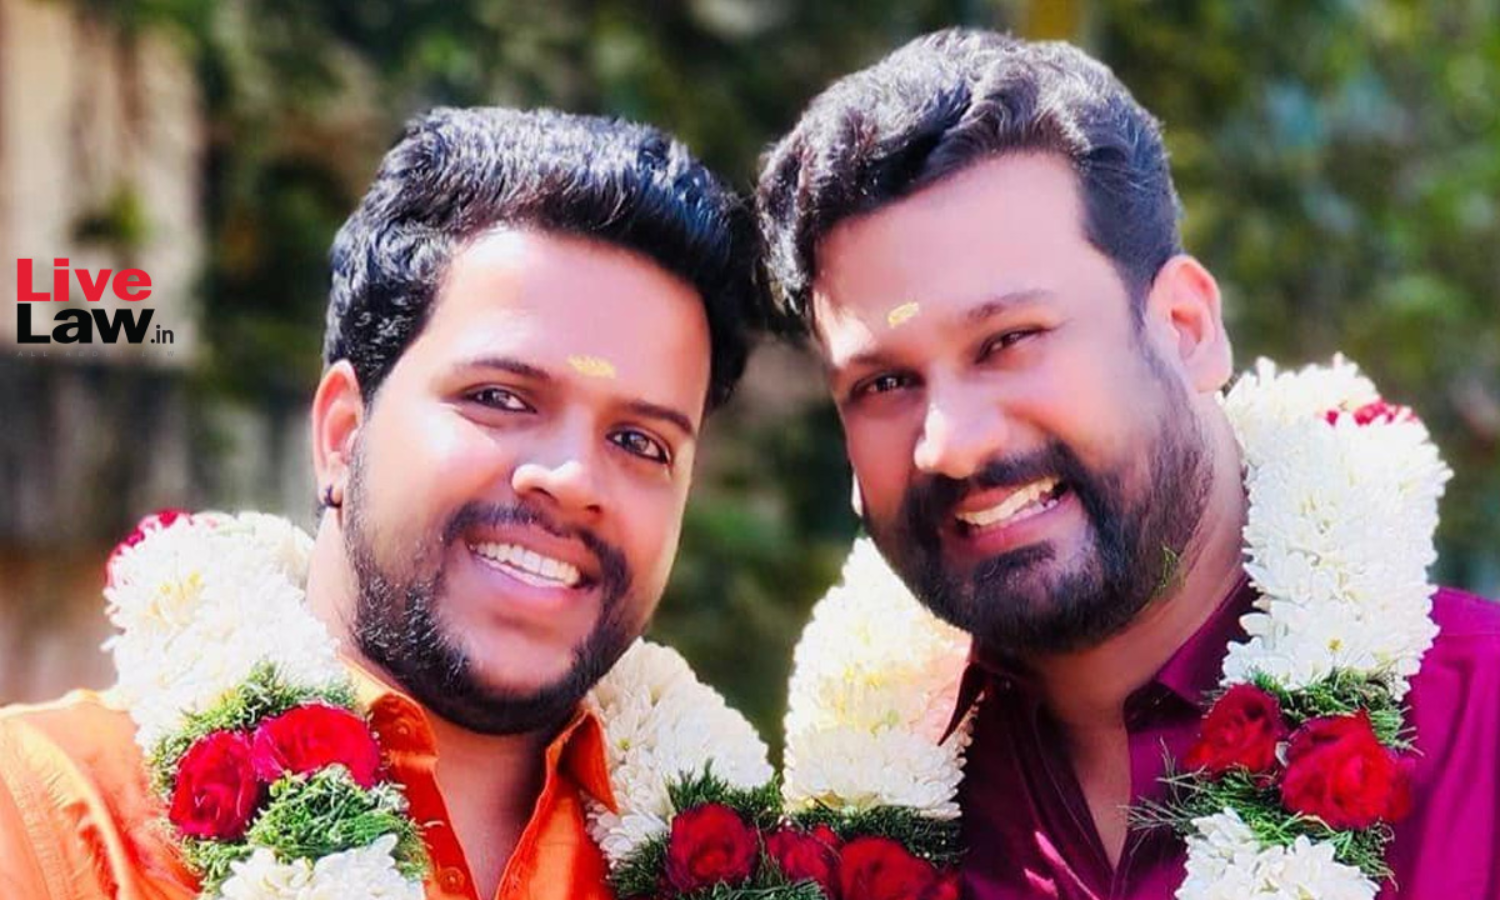 Legalising Same-Sex Marriages Interview Of Keralas First Married Gay Couple